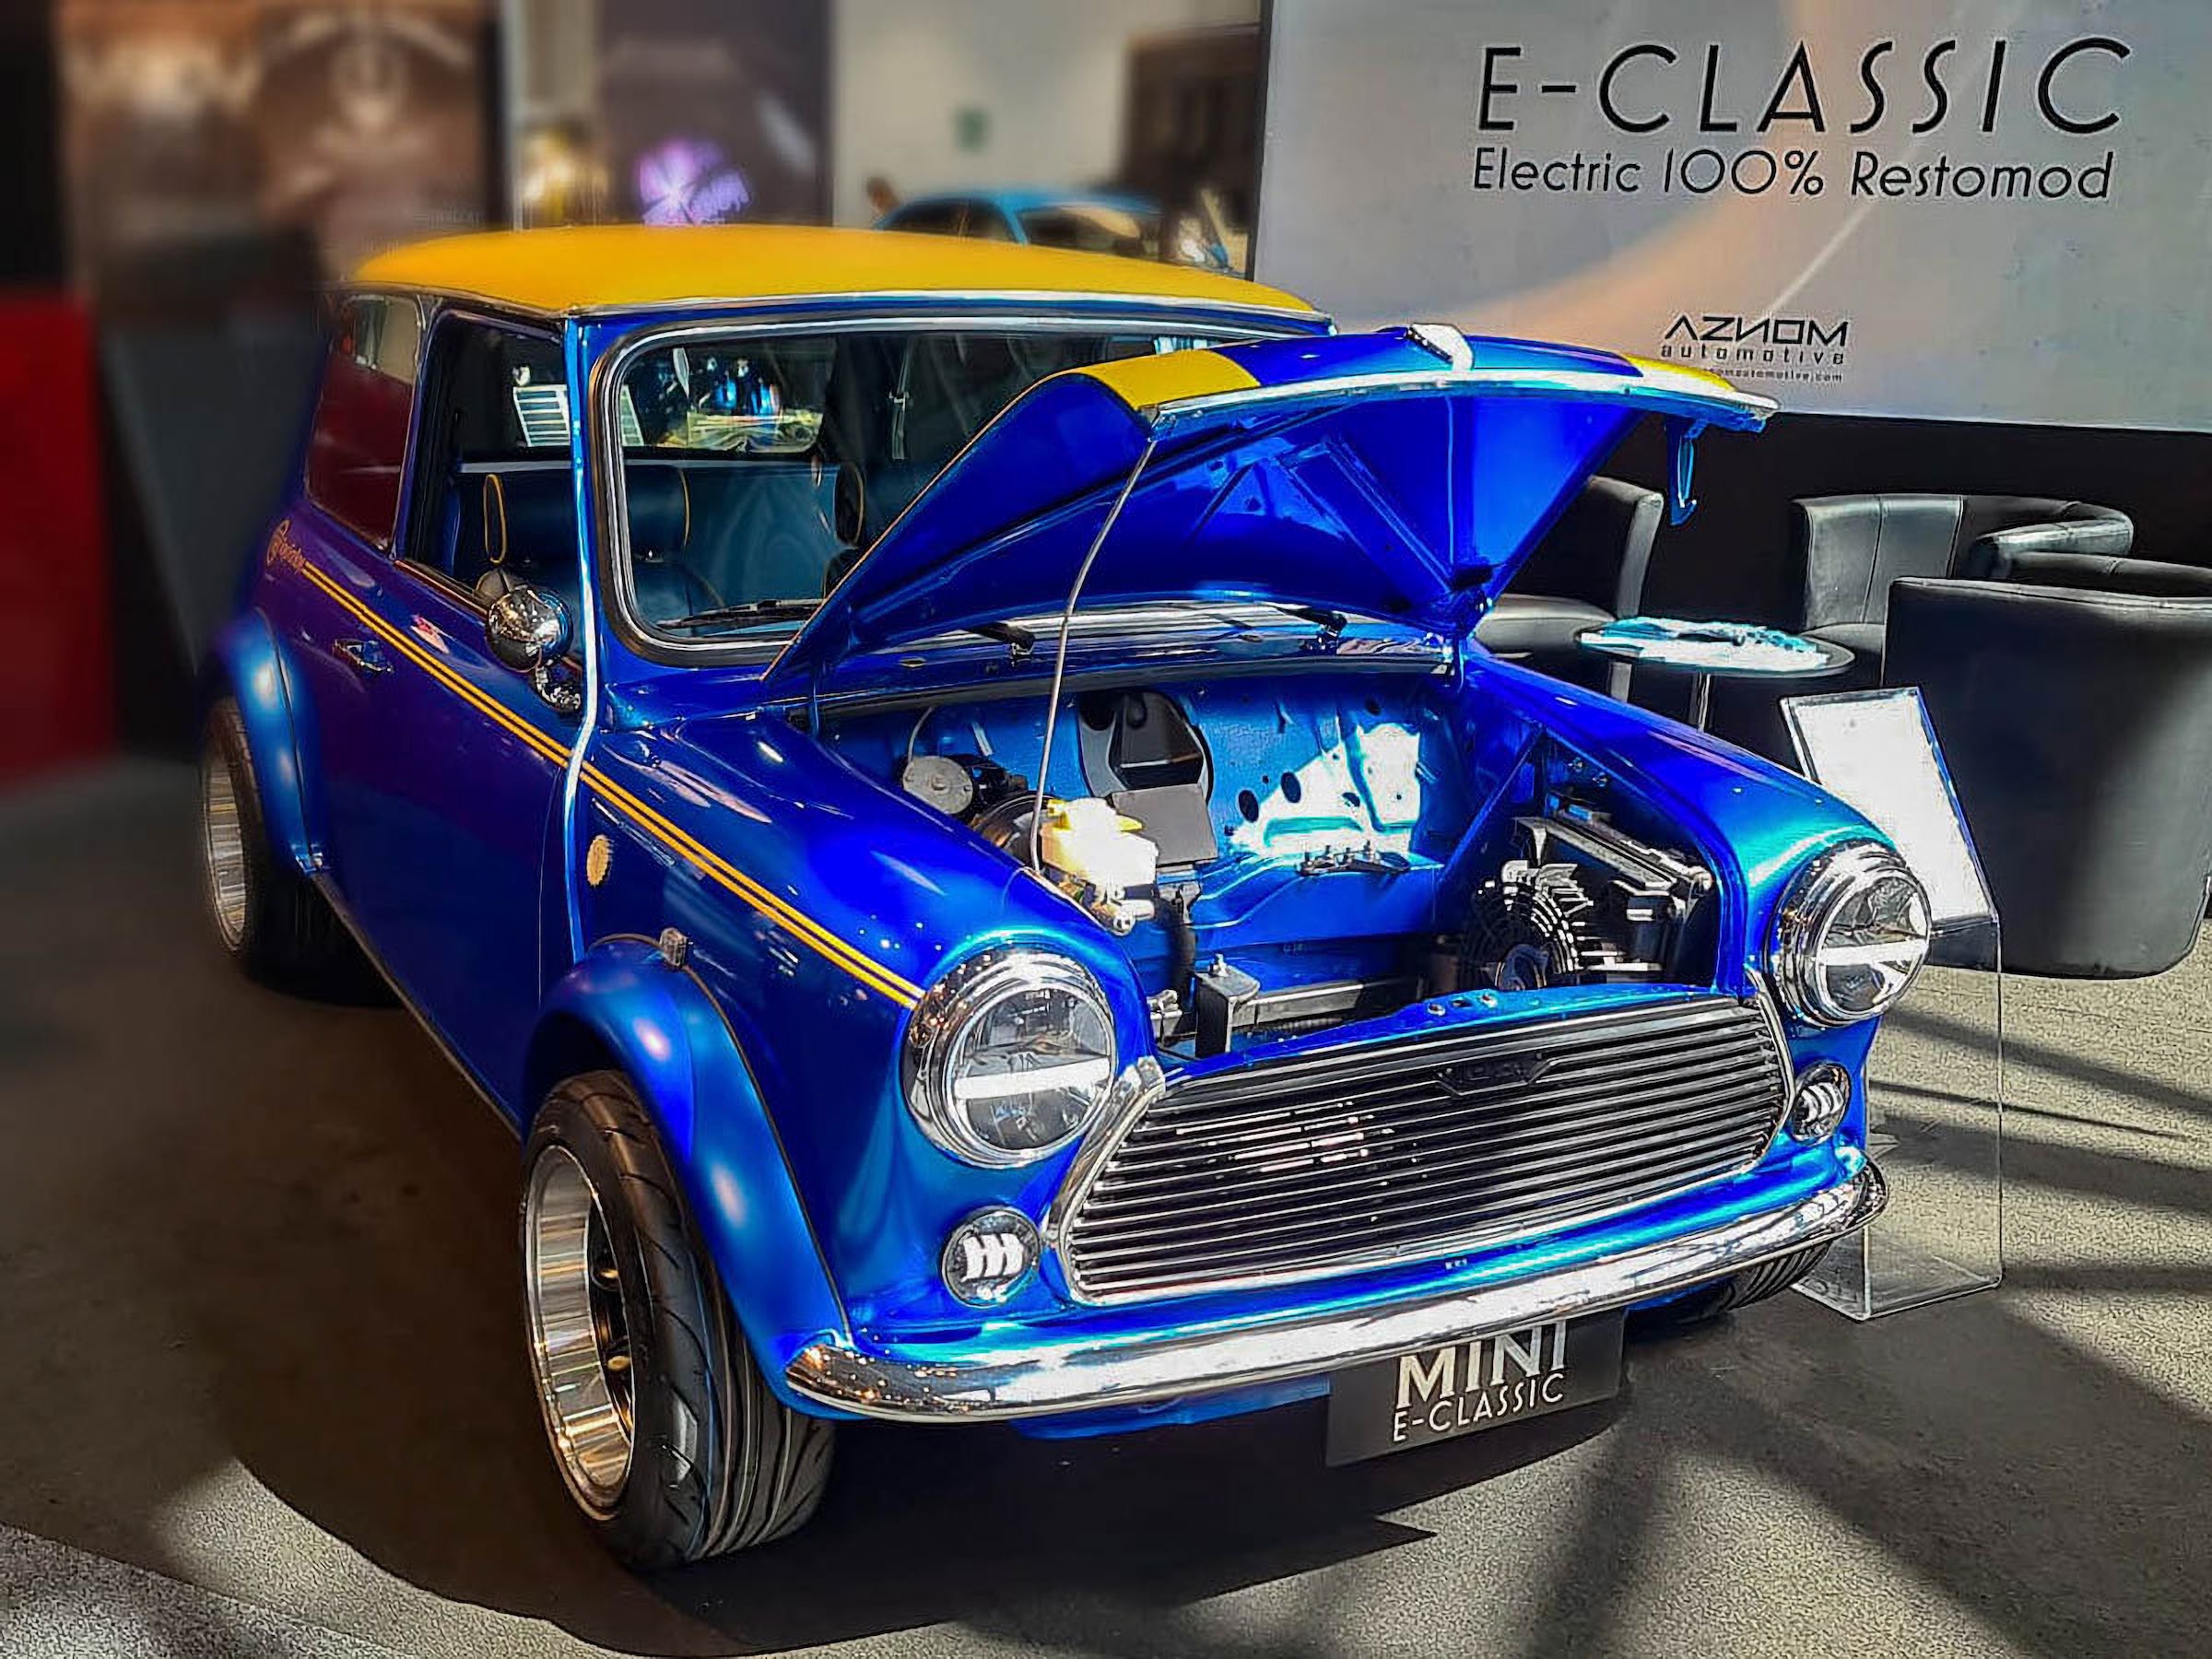 Post-1982 Minis can now go electric